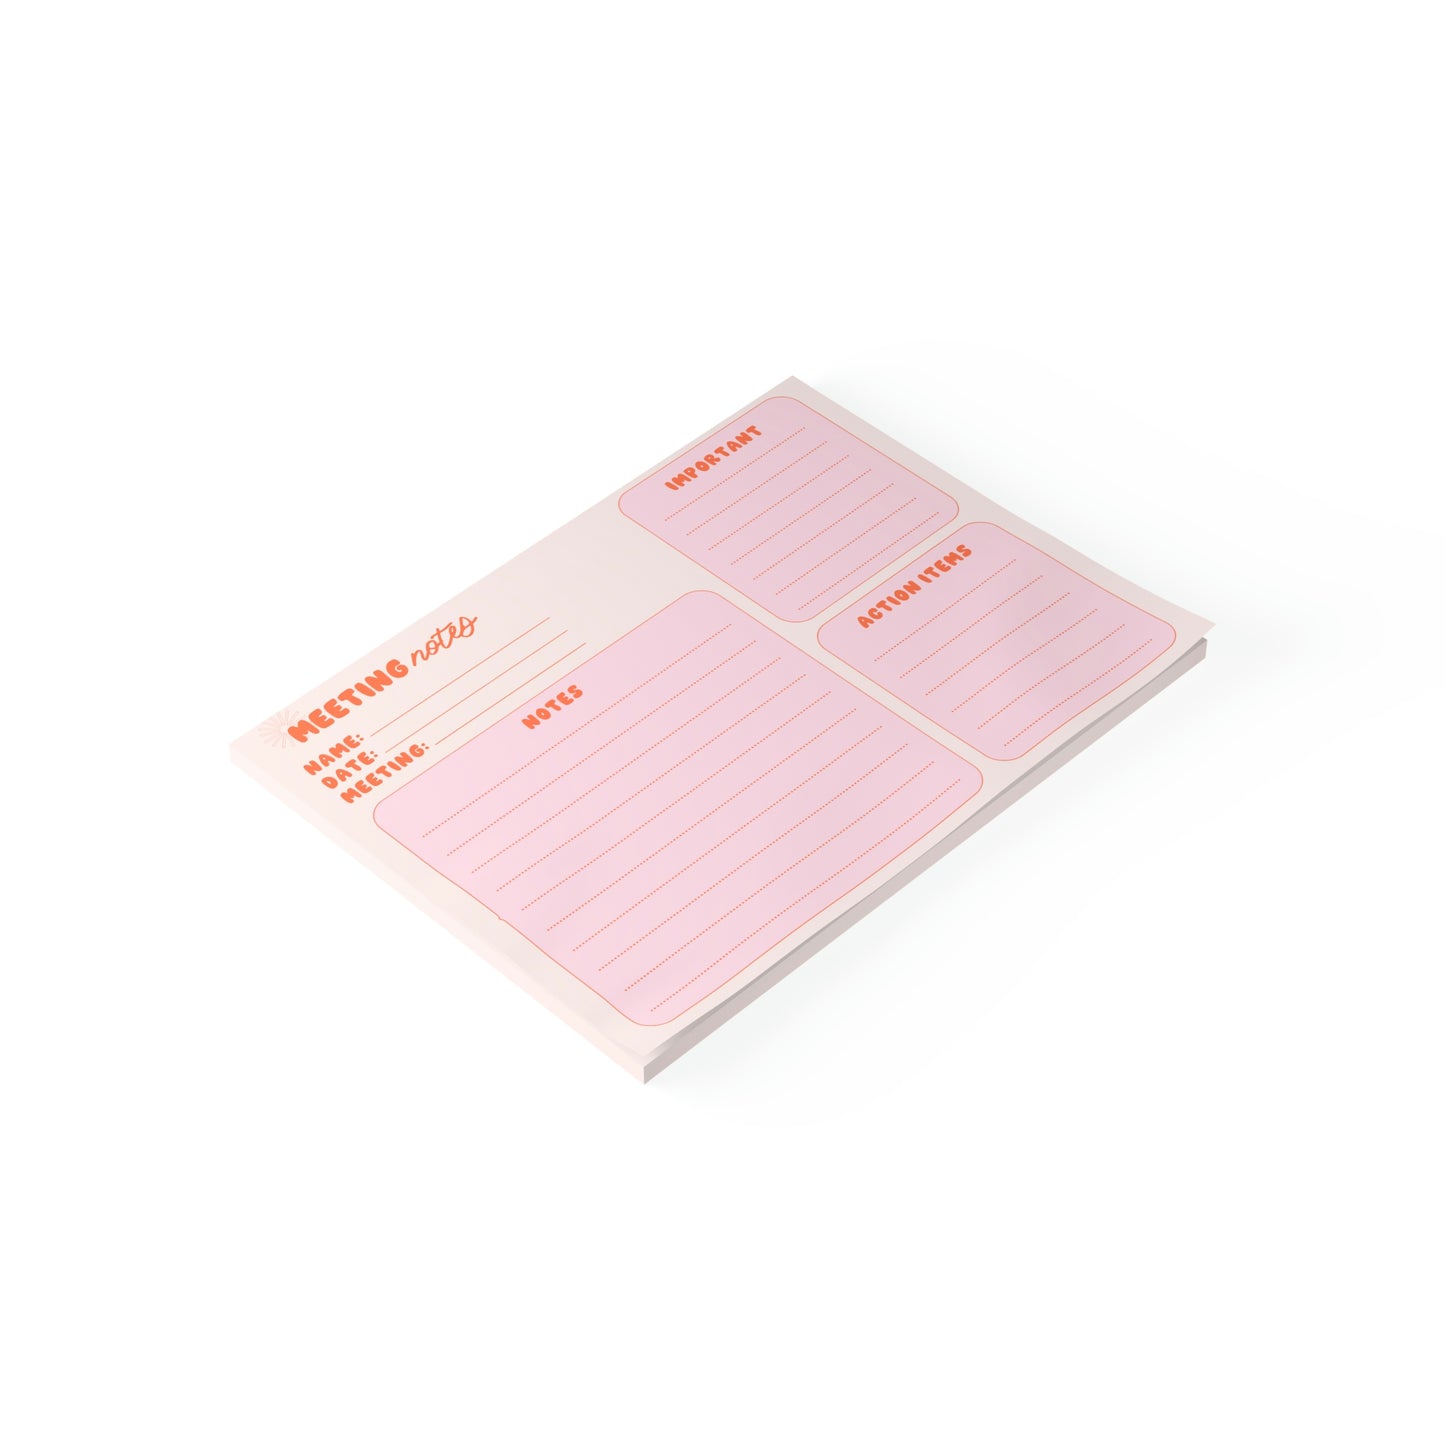 Meeting Notes Post-it® Note Pad 8 x 6